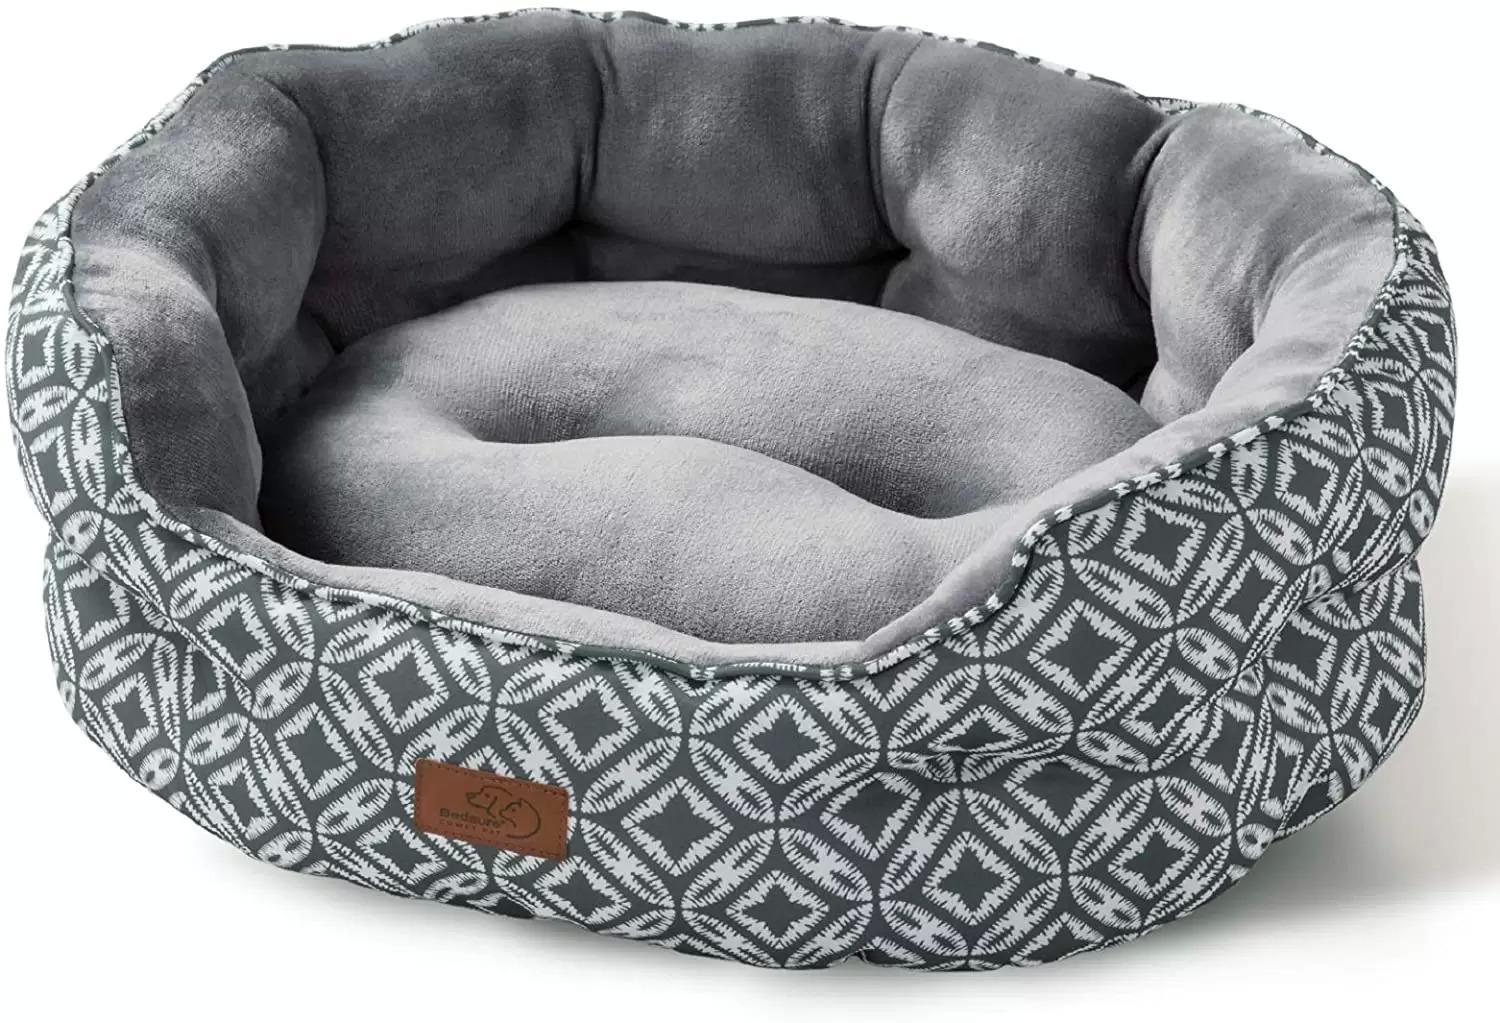 Bedsure Round Plush Flannel Cat Bed for $12.81